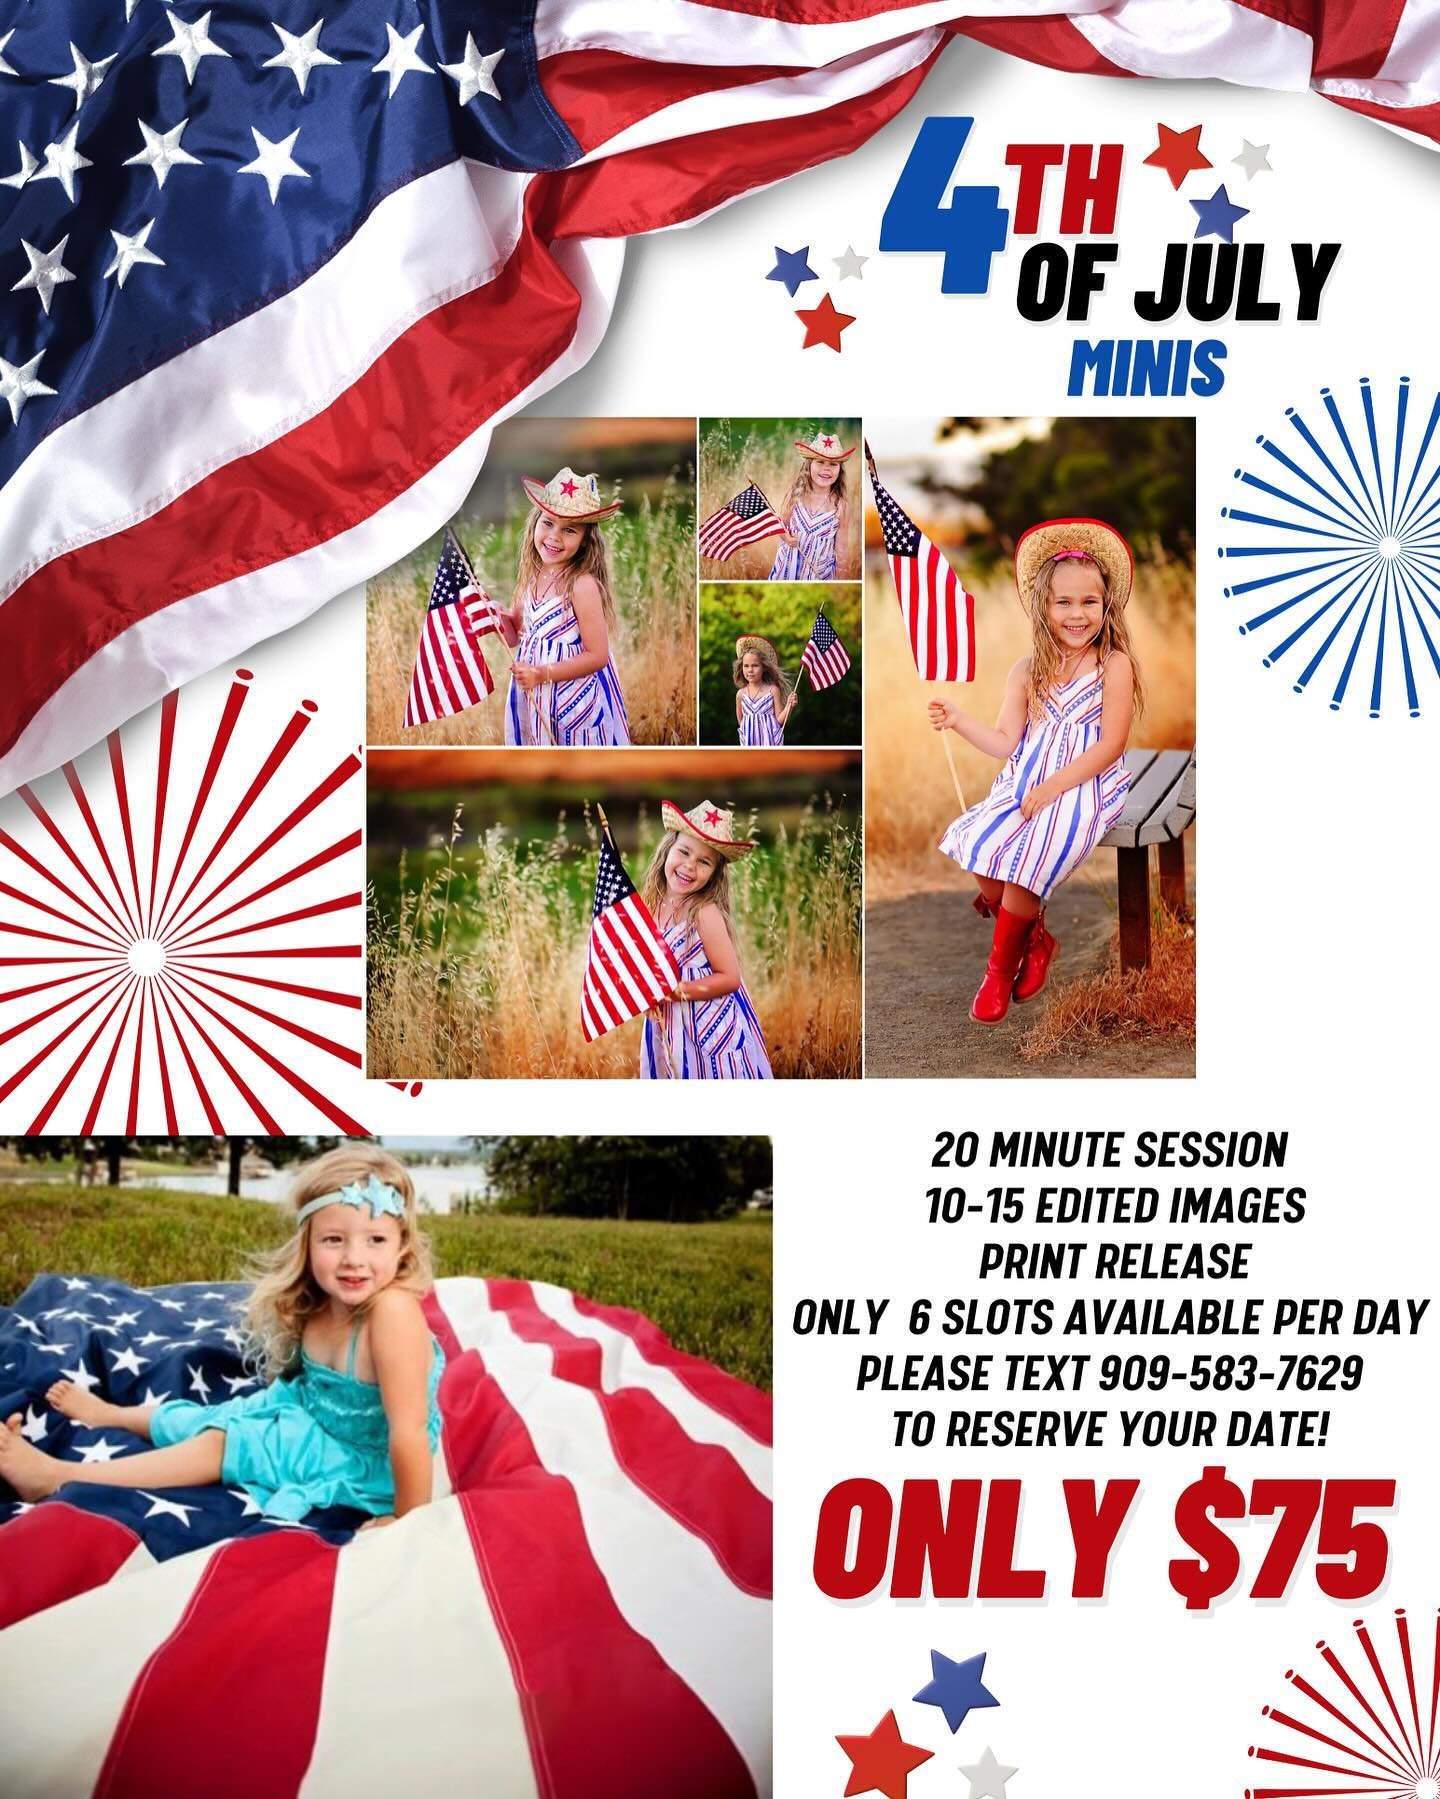 Now booking for the 4th of July mini sessions! We Will have an amazing 4th of July, America inspired set up to be able to capture what will be your new favorite photos. Please text 909-583-7629 so book your photo session.